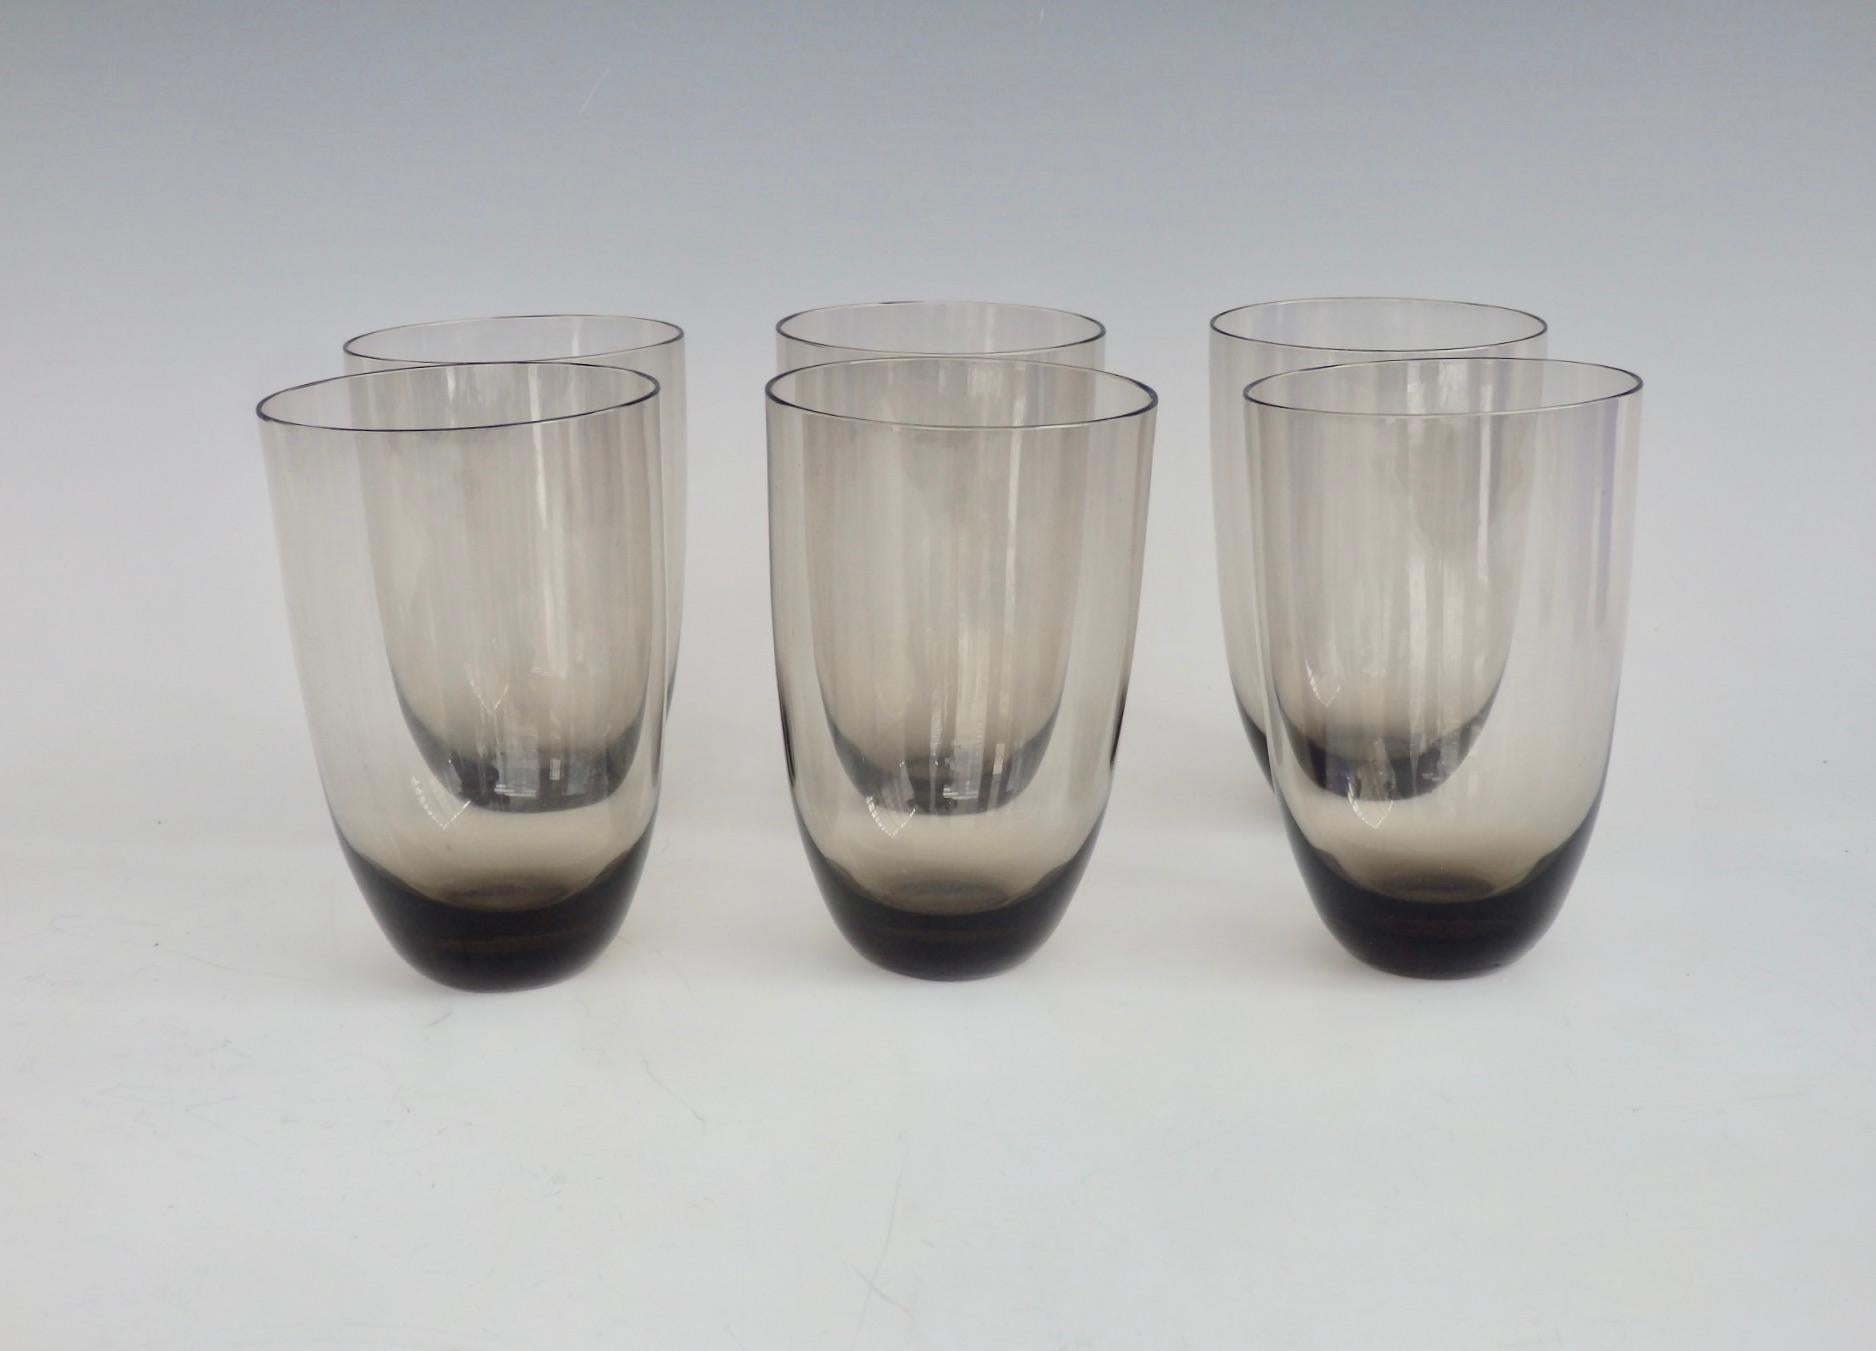 Six cocktail glasses or water tumblers. Gently curving form in smoked glass.